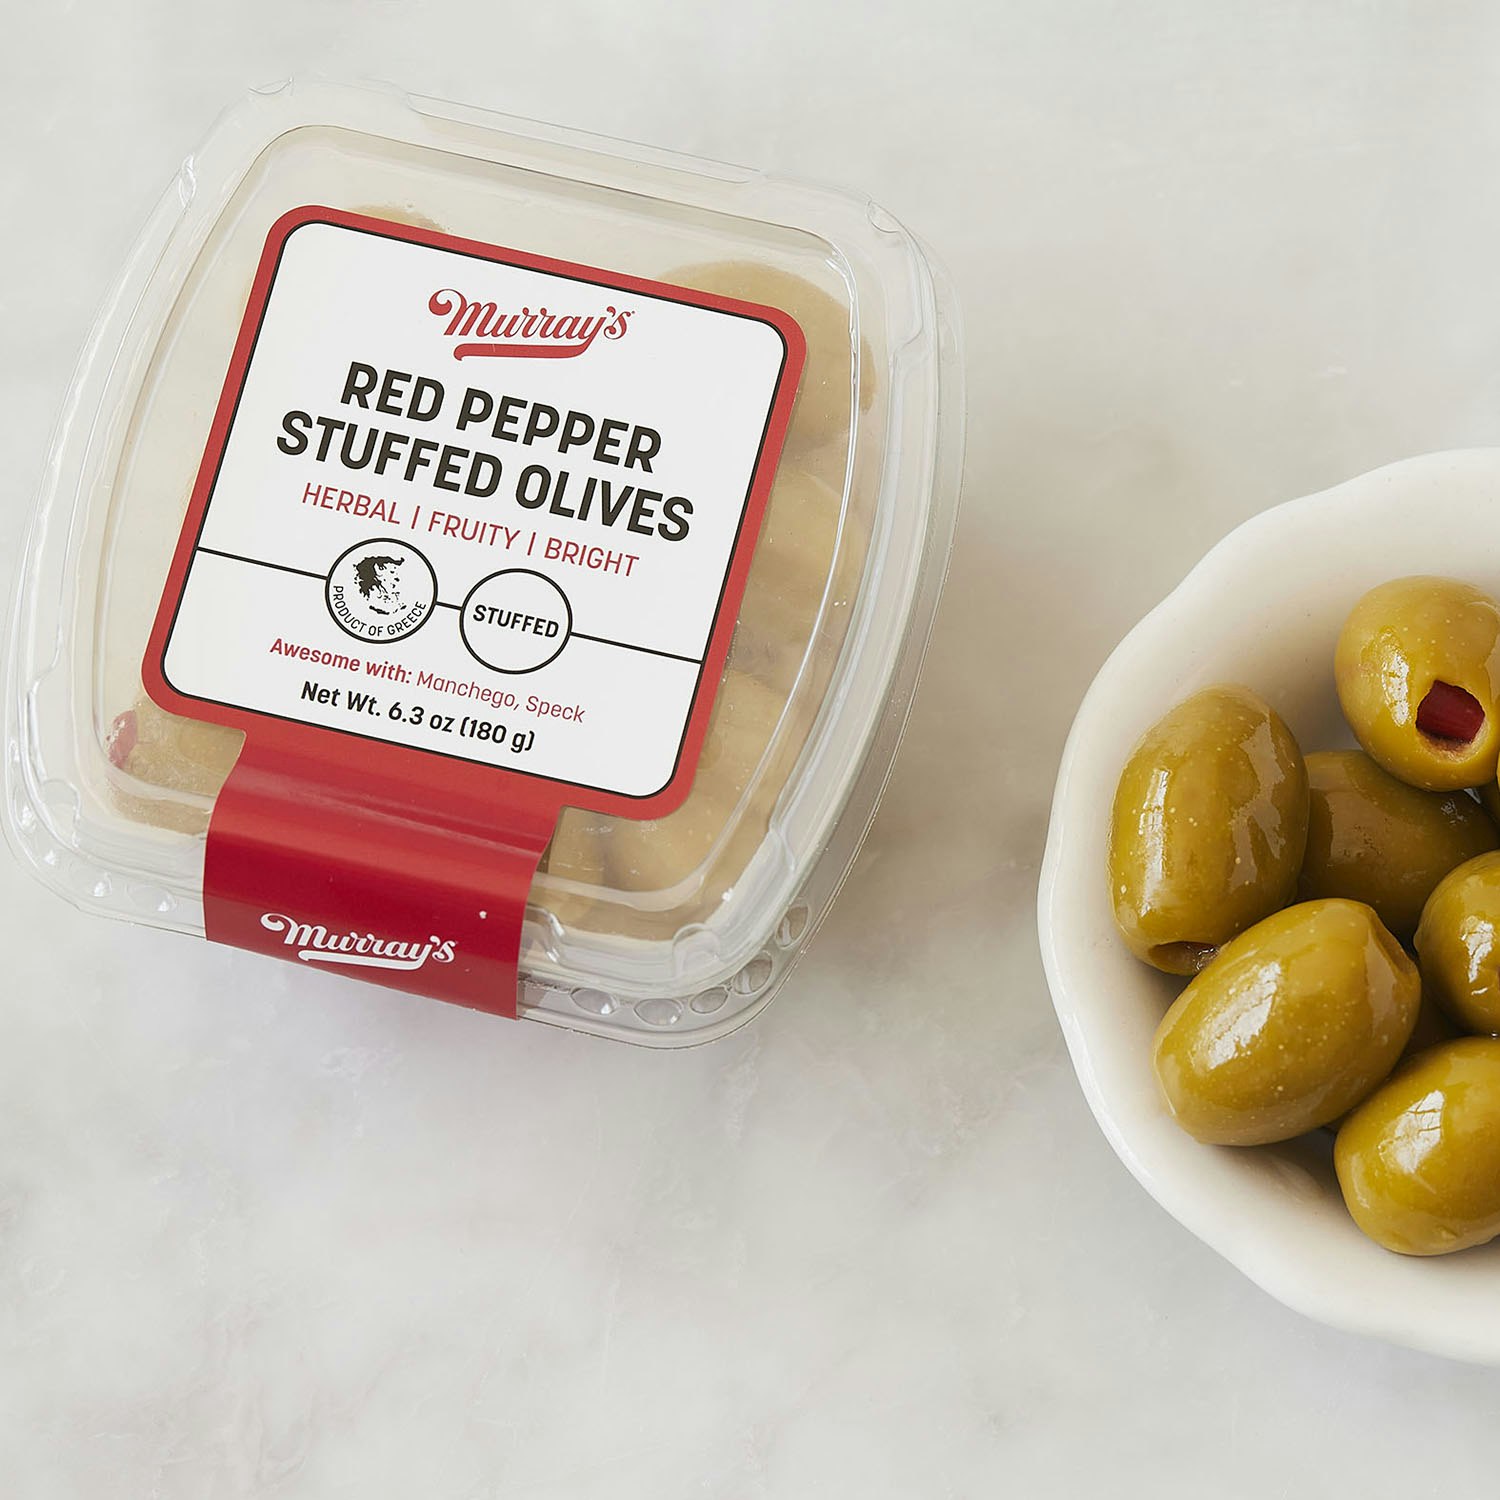 Murrays-Red-Pepper-Stuffed-Olives-specialty-foods-127344-04